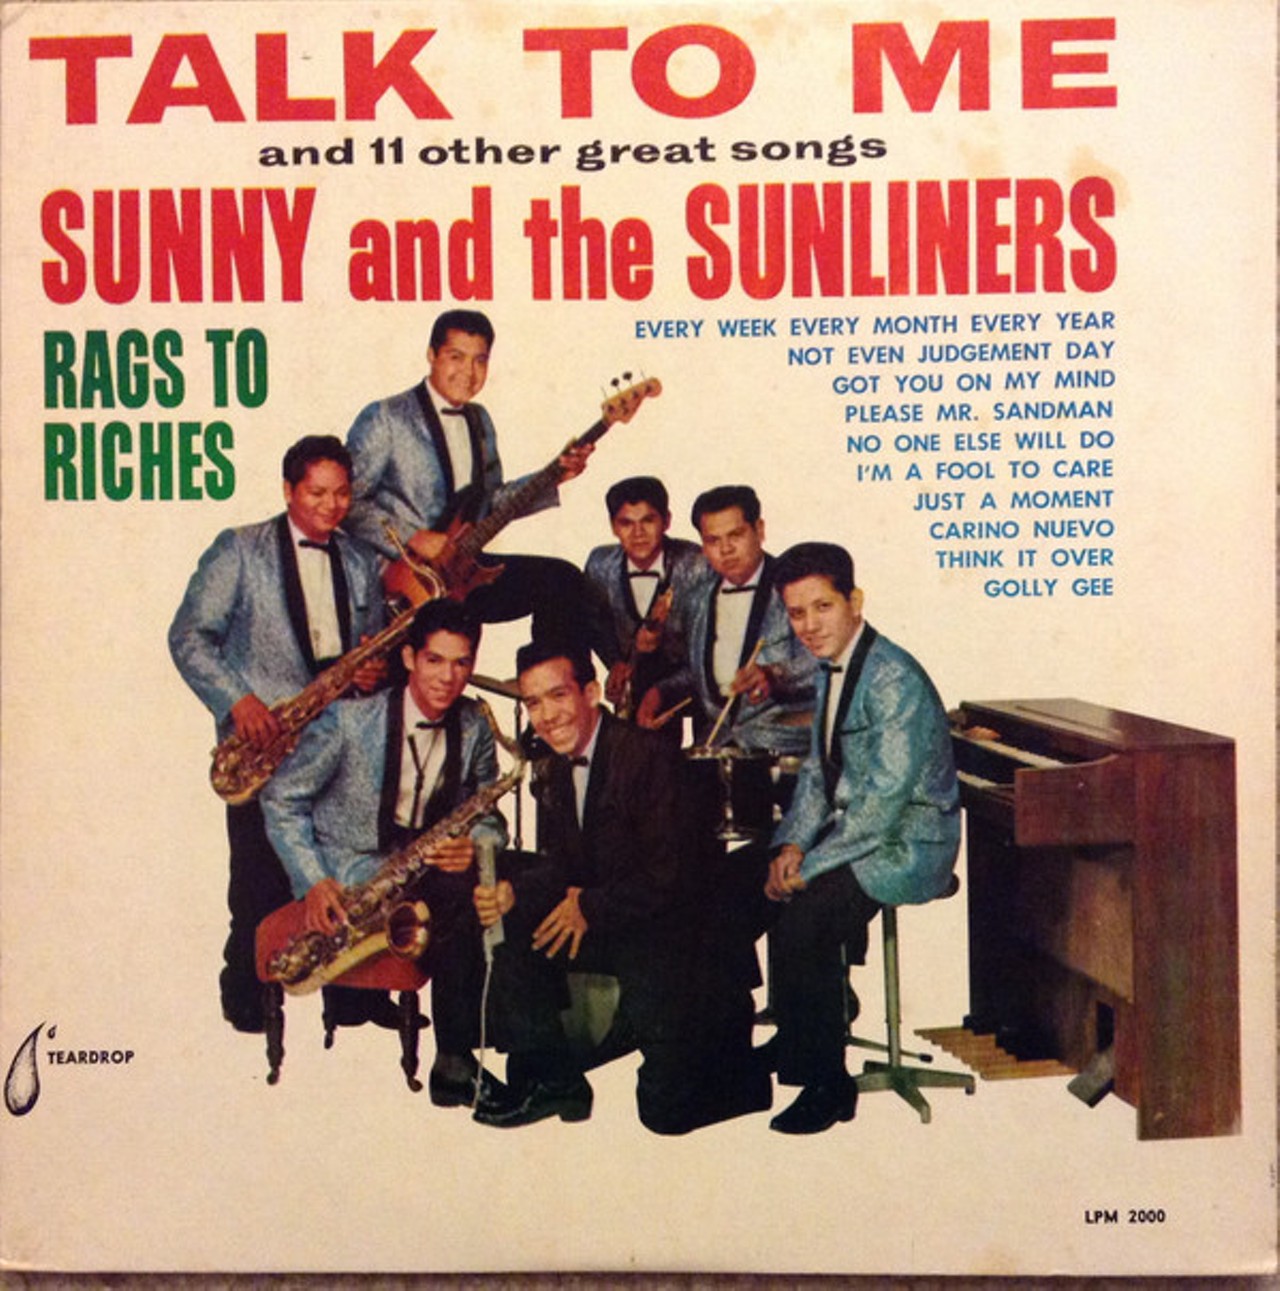 Sunny and the Sunliners: "Talk to Me and 11 Other Great Songs"
In truth, we could have included any compilation of singles from this act that helped pioneer San Antonio's West Side soul sound. From the late '50s on, Sunny Ozuna and his band helped forge a Tex-Mex take on soul and R&B that continues to win new fans, even today.
Photo via Teardrop